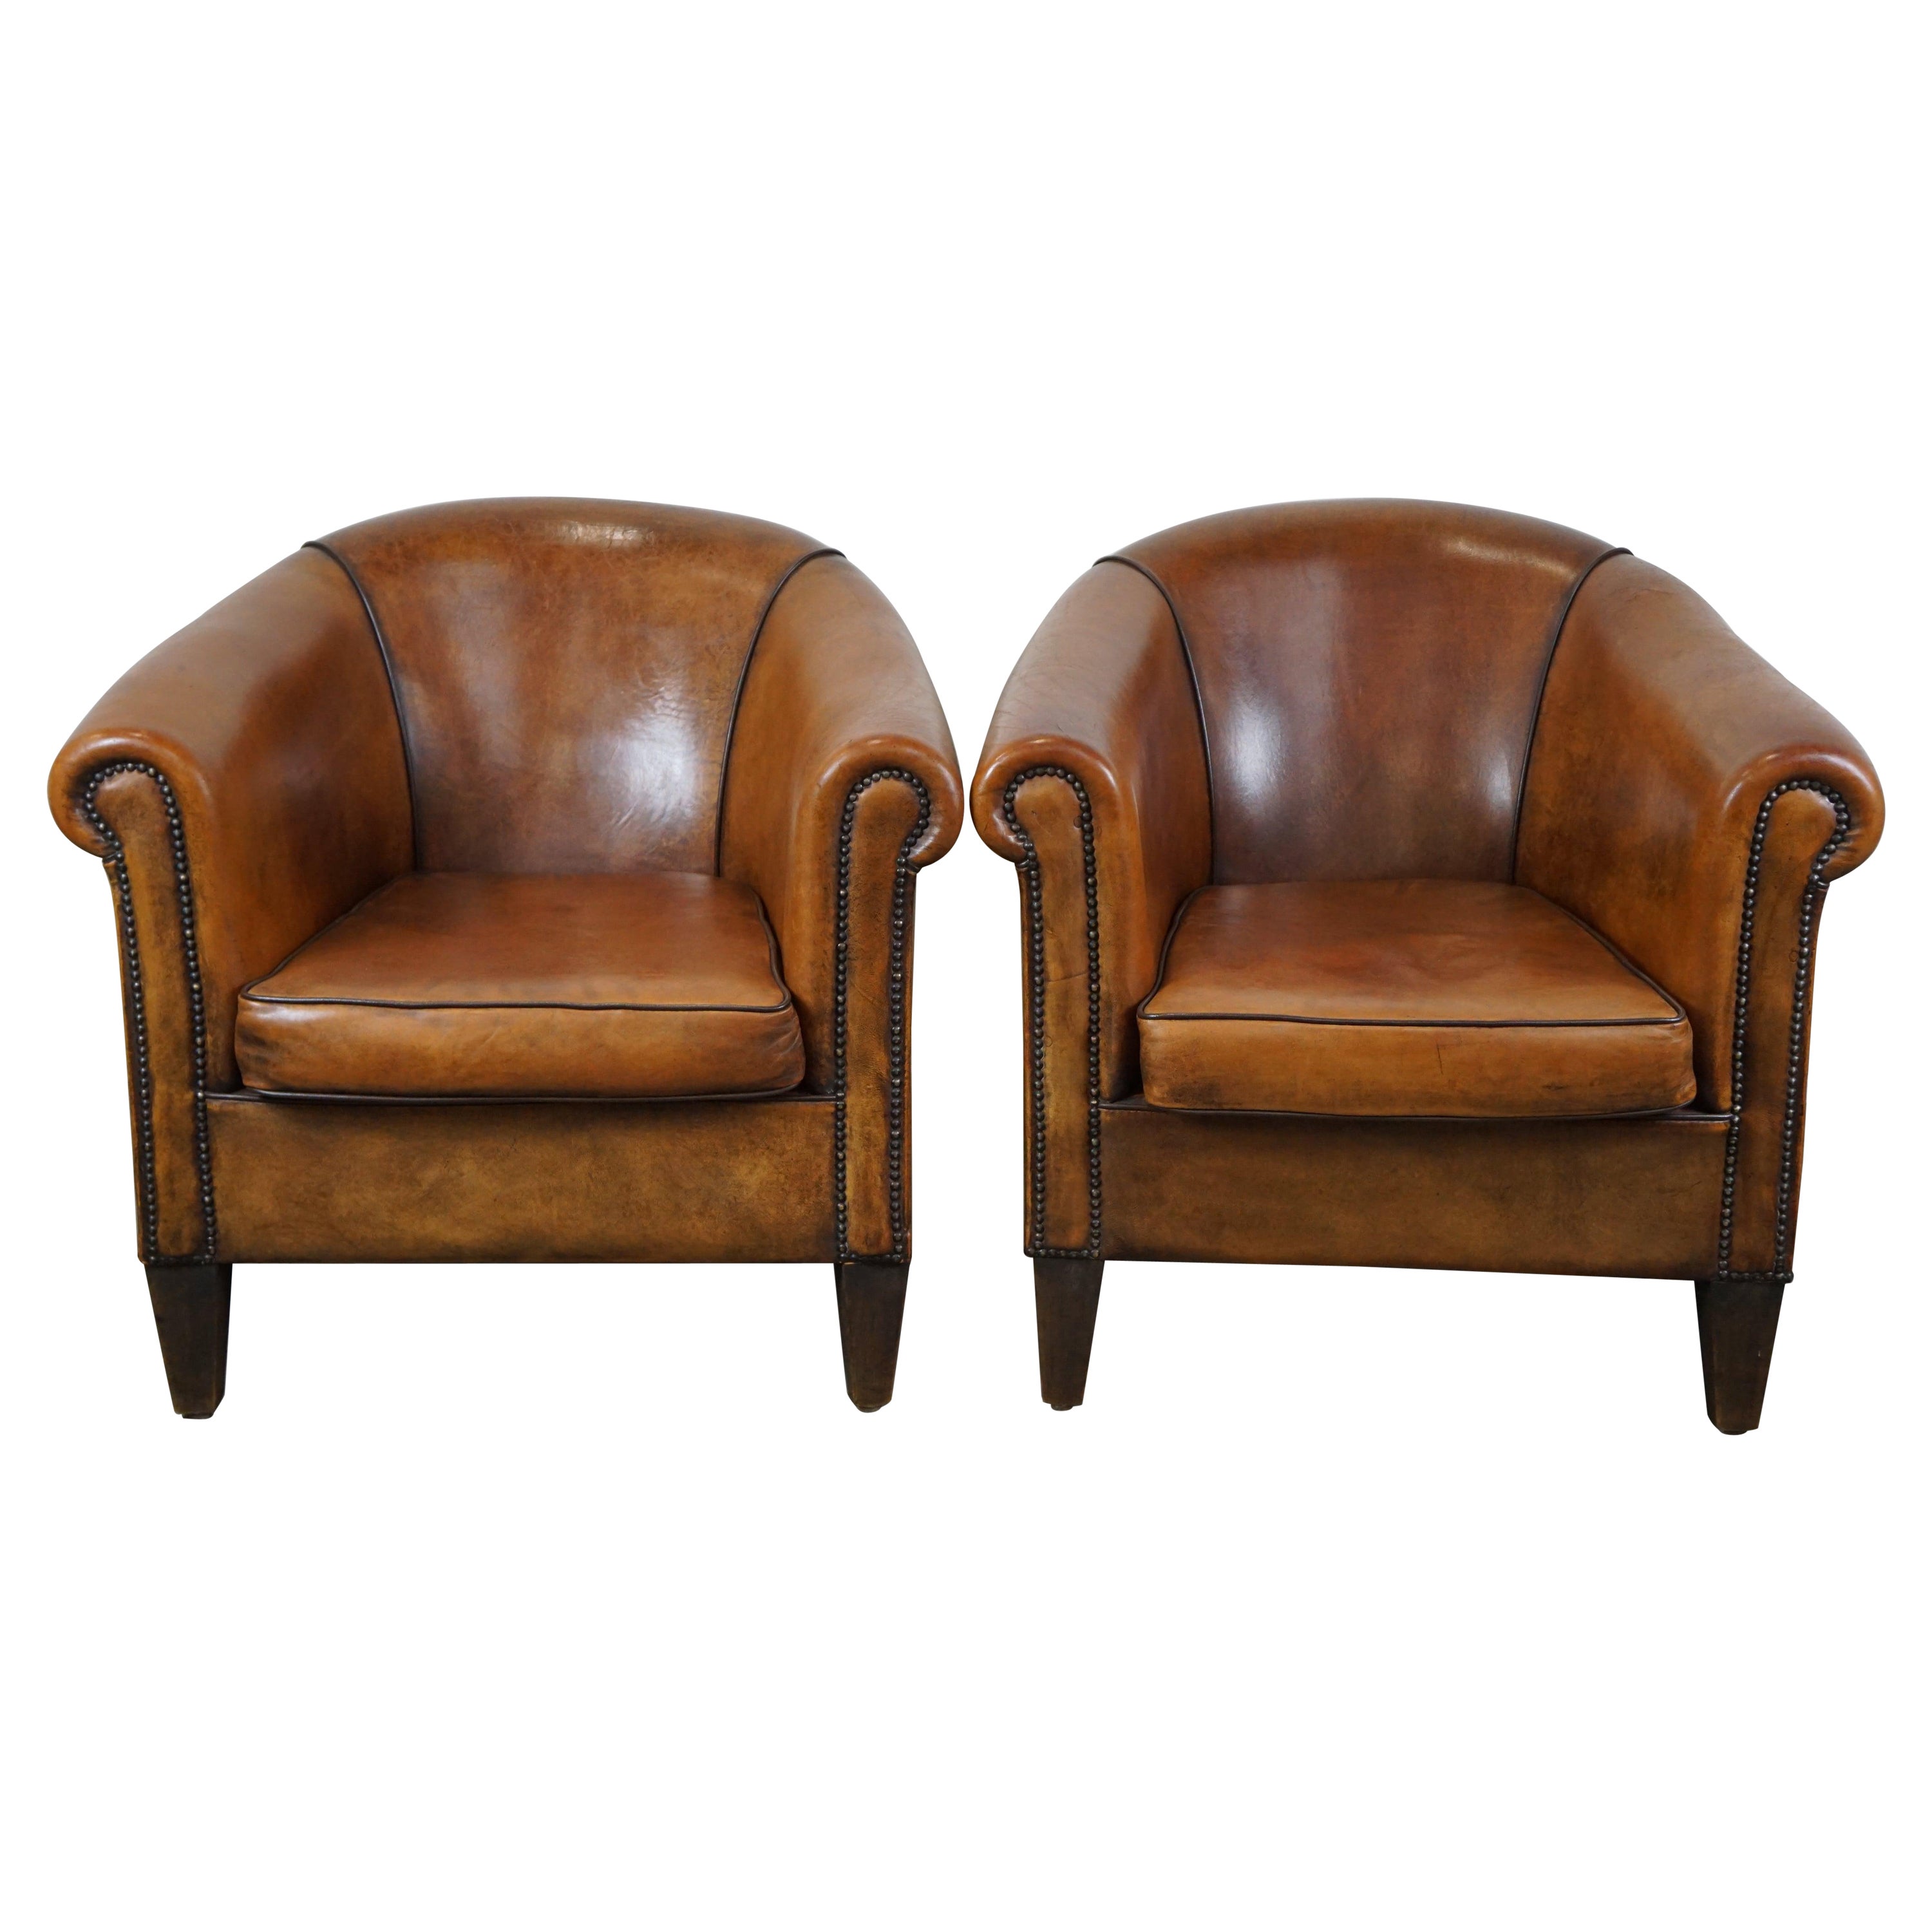 Set of 2 amazing and characterful sheep leather club armchairs with warm color For Sale